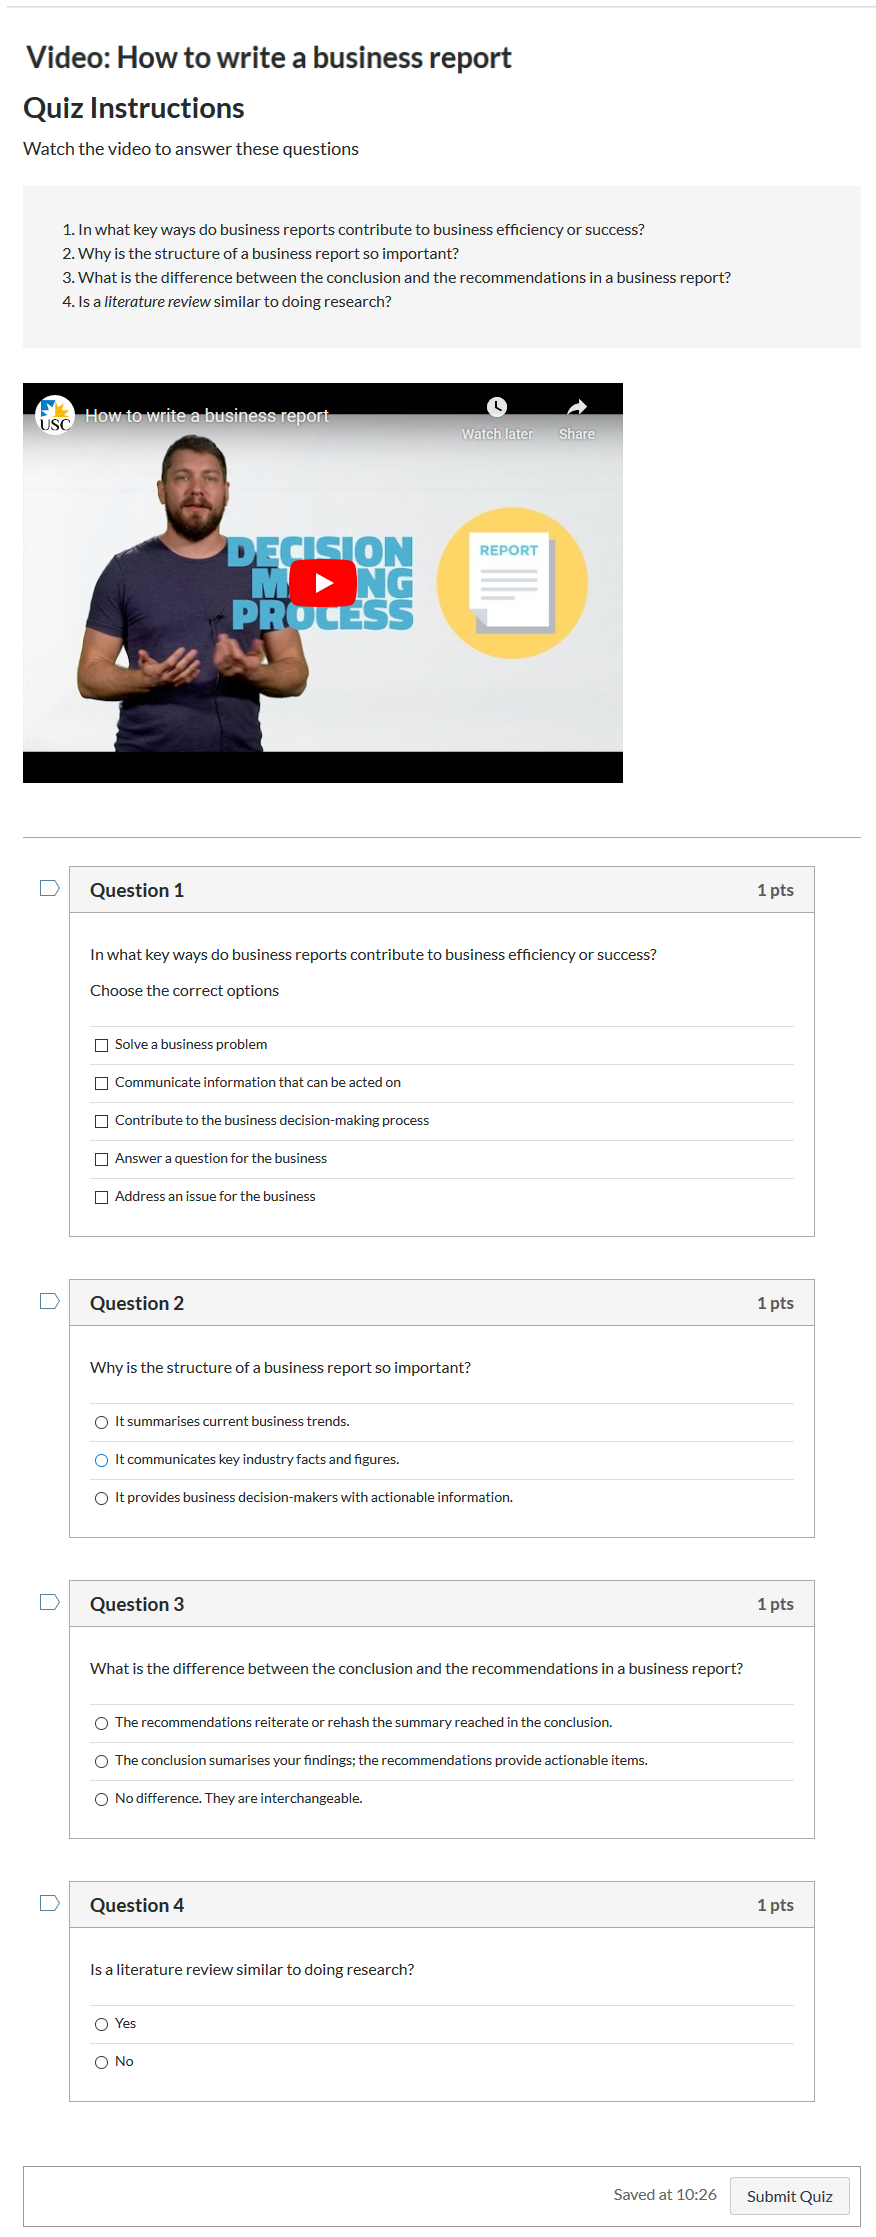 A Canvas quiz with 4 questions based on the embedded video.